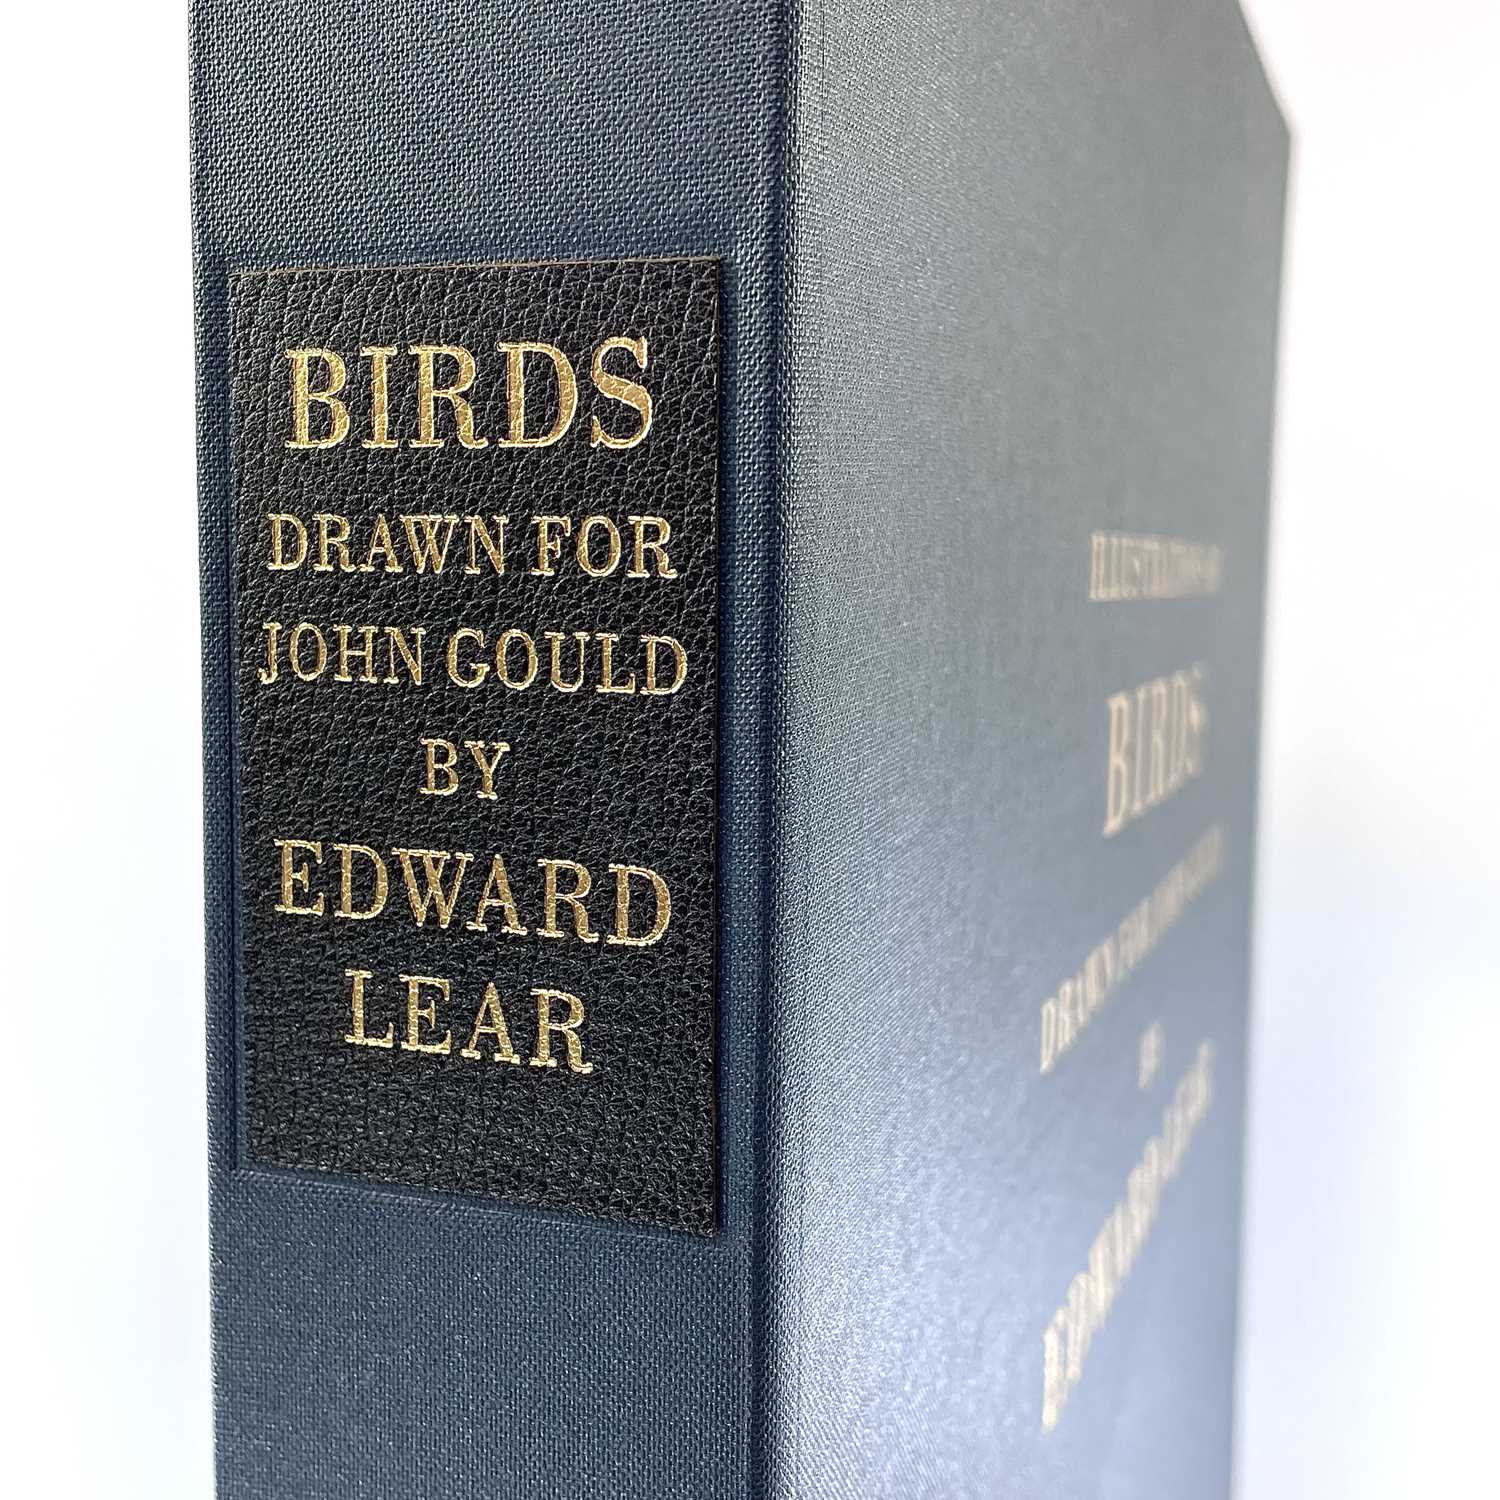 FOLIO SOCIETY SIGNED LIMITED EDITION. 'Illustrations of Birds Drawn for John Gould by Edward - Image 9 of 25